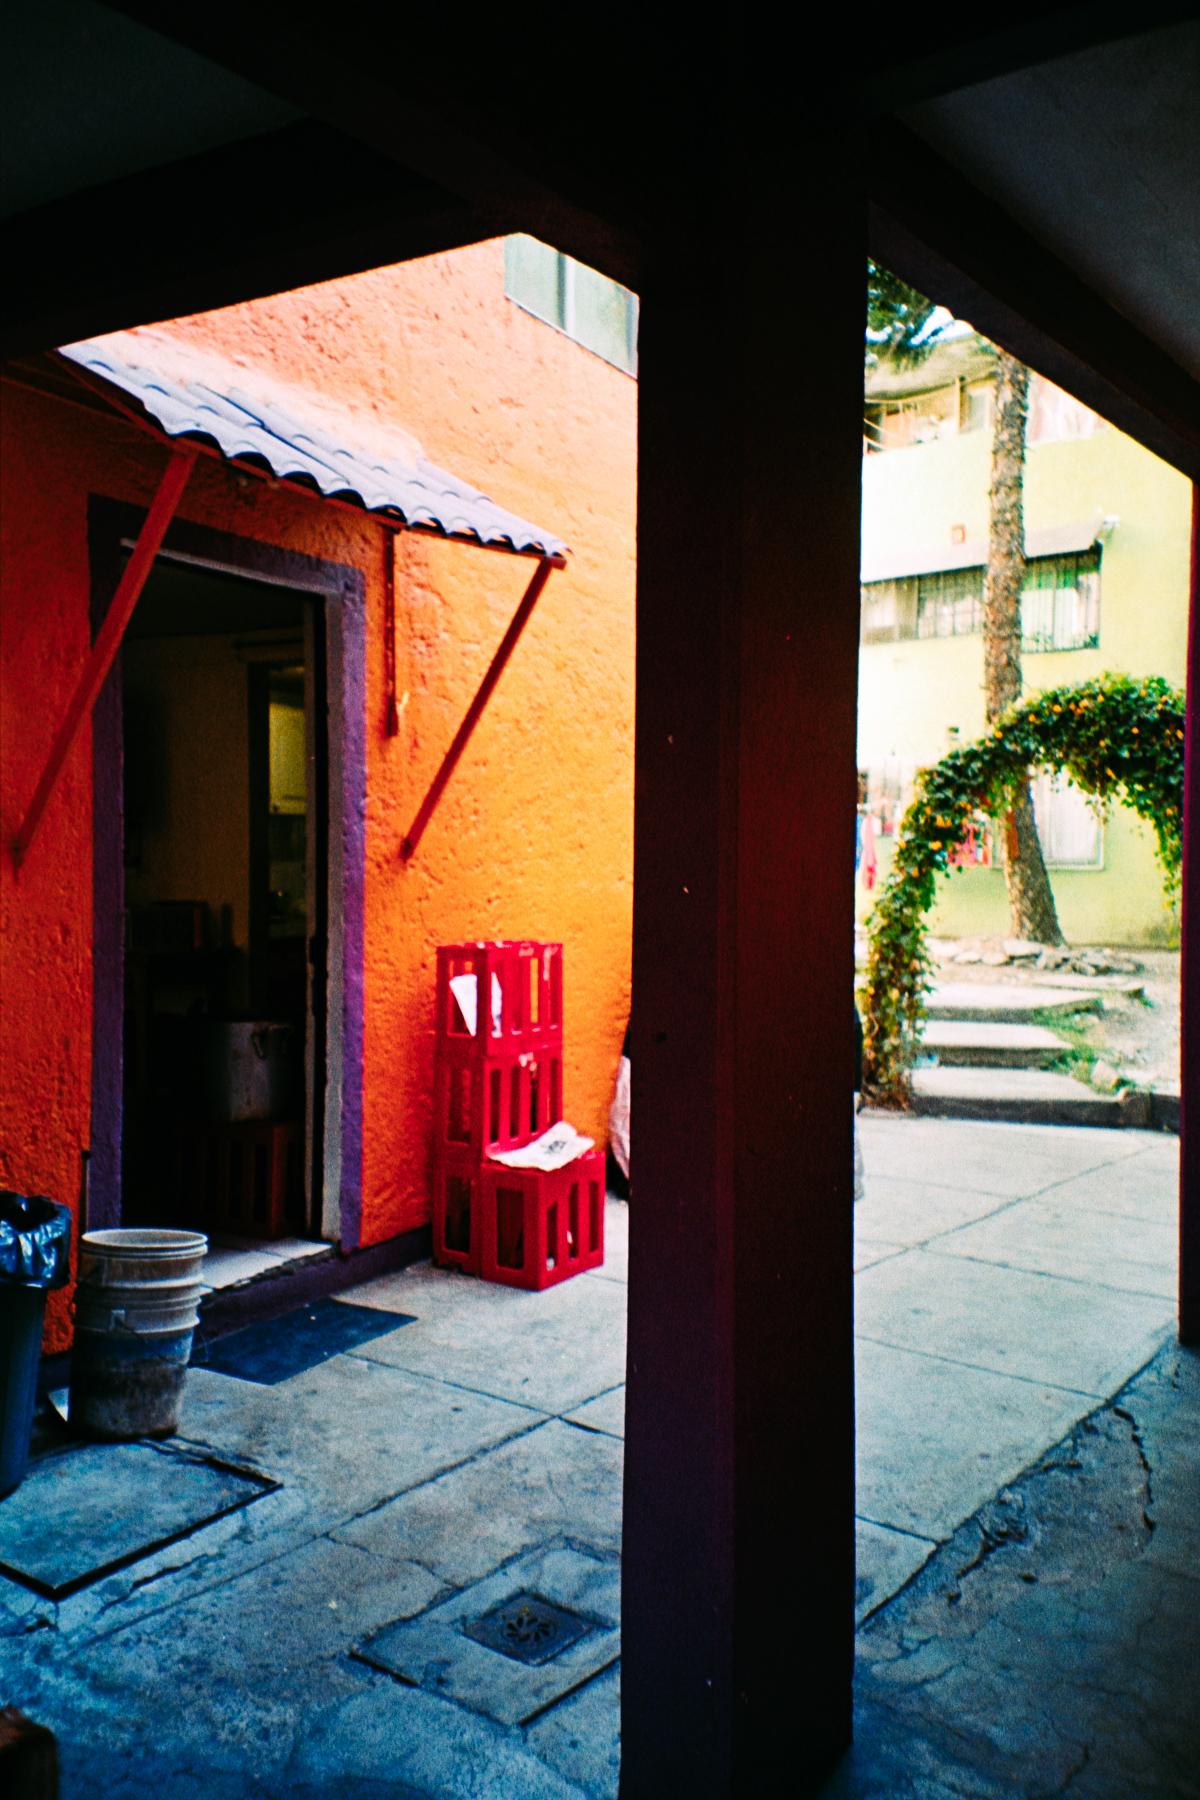 photograph of a building interior, with orange wall, red crates, and greenery in the background